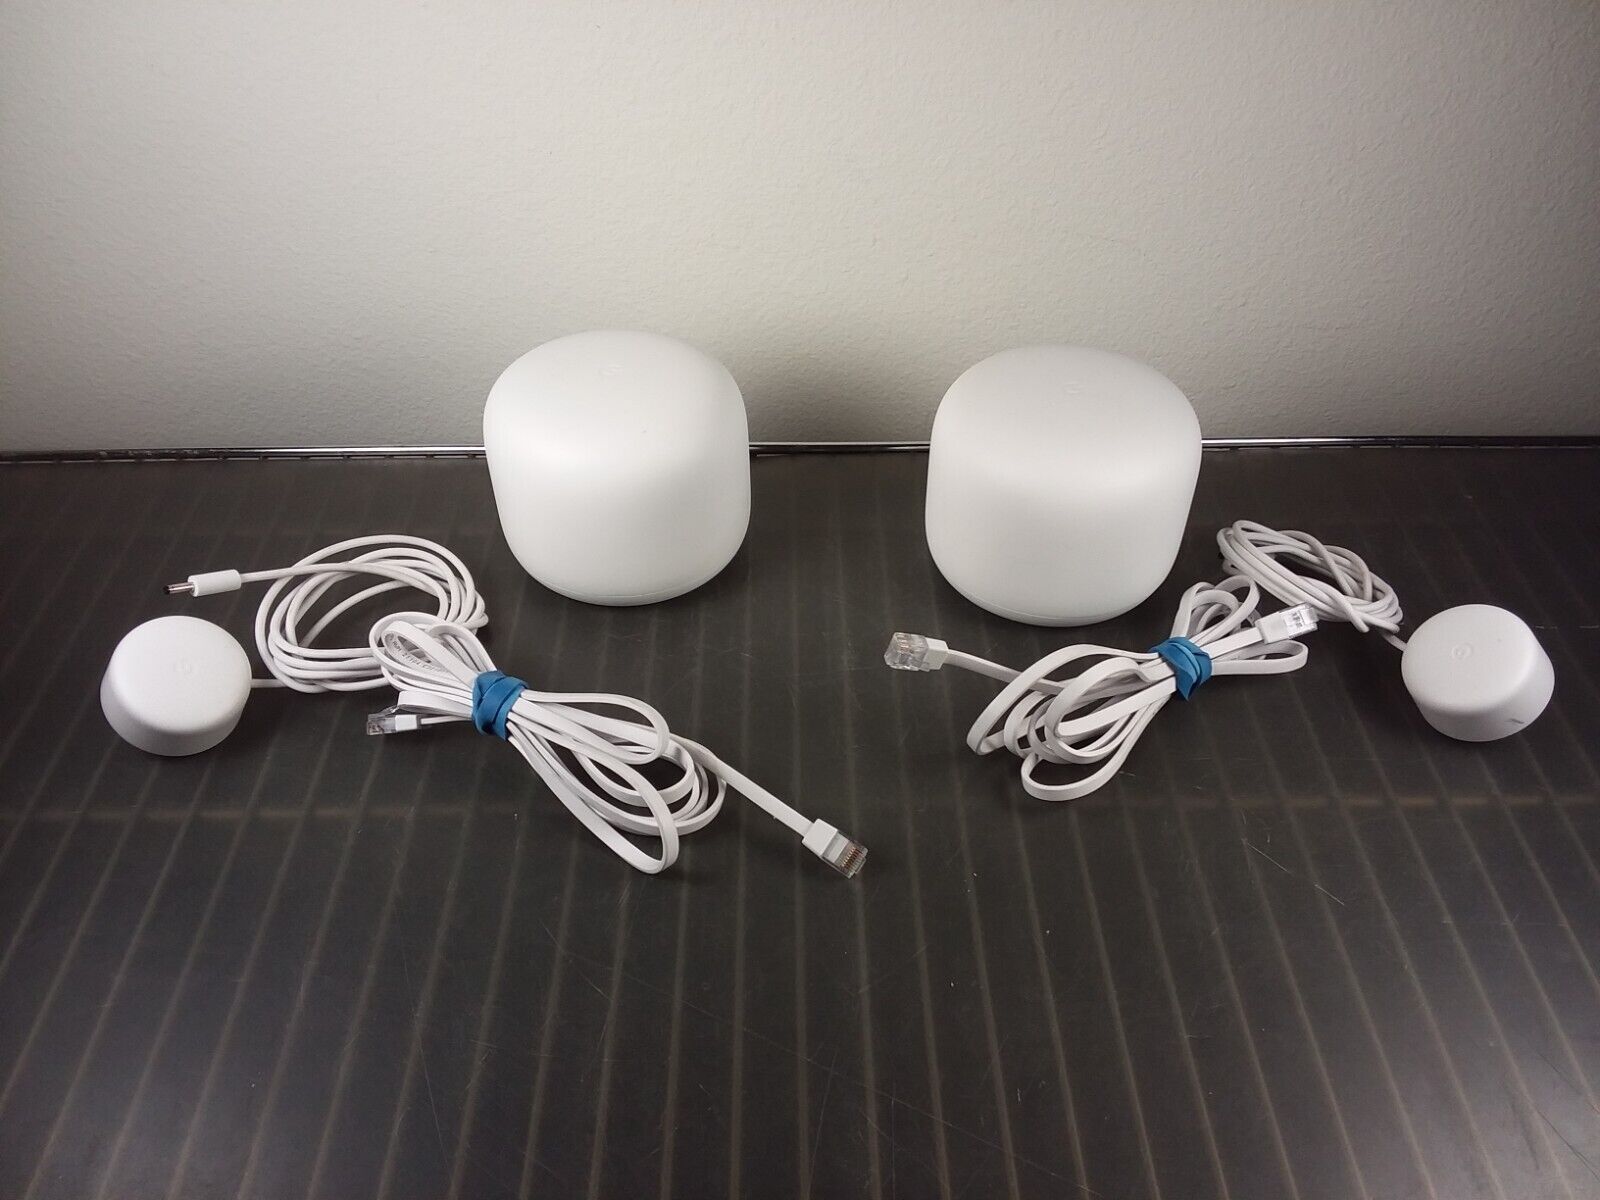 Pair(2) of Google Nest Wi-Fi Routers A4R-H2D With Power supplies and cables.